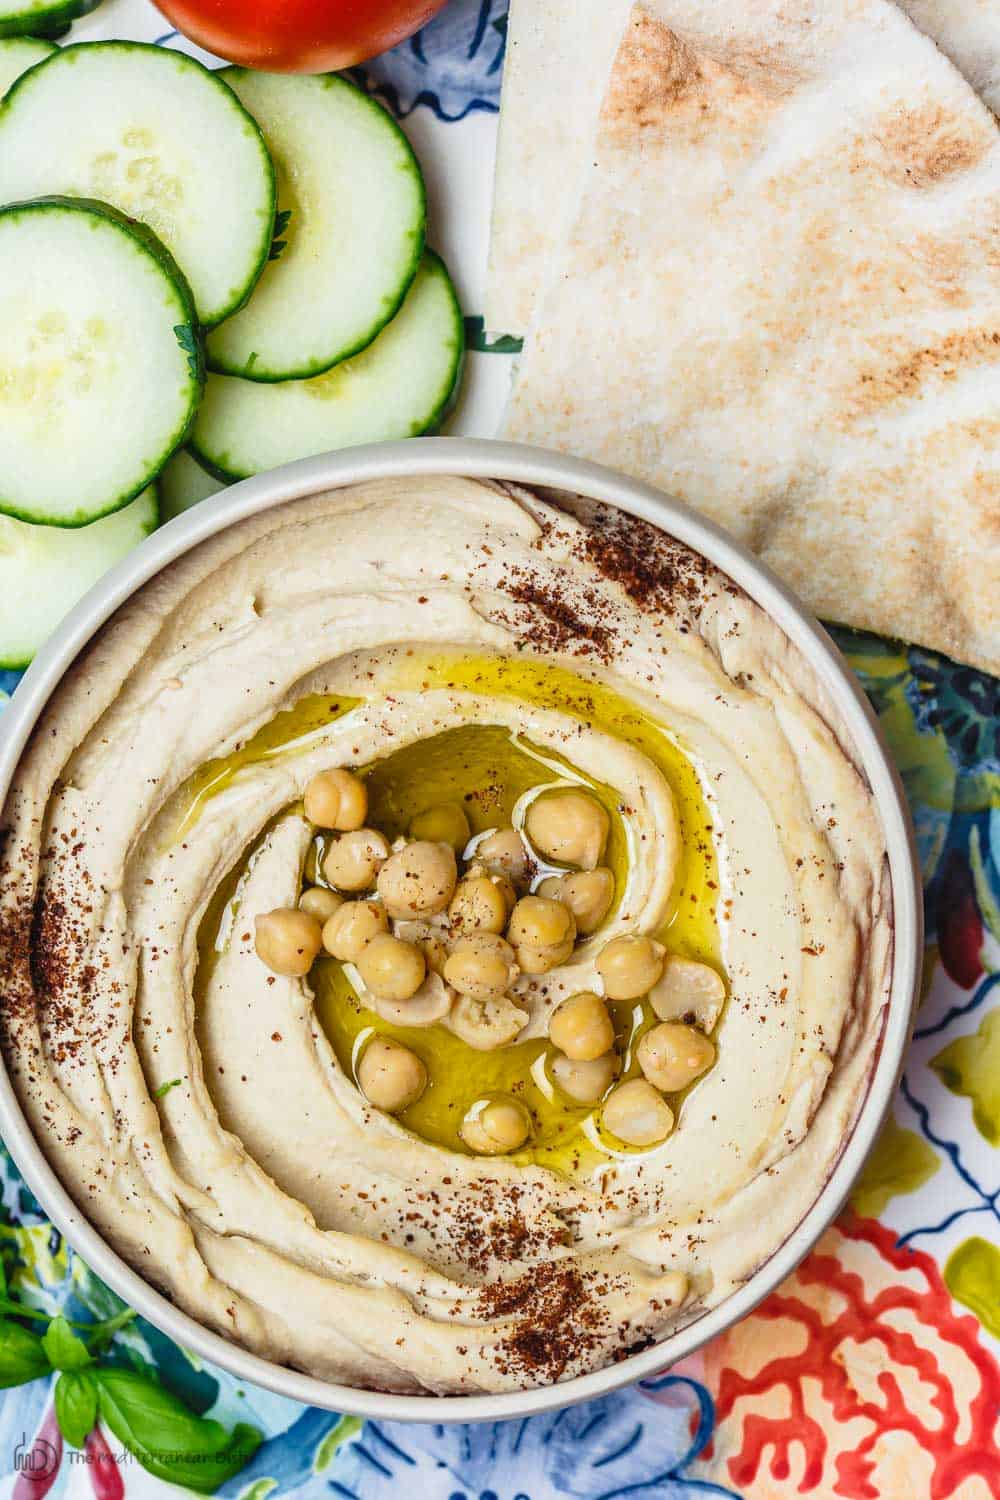 hummus served in a bowl and garnished with olive oil, chickpeas and sumac. A side of pita and cucumbers